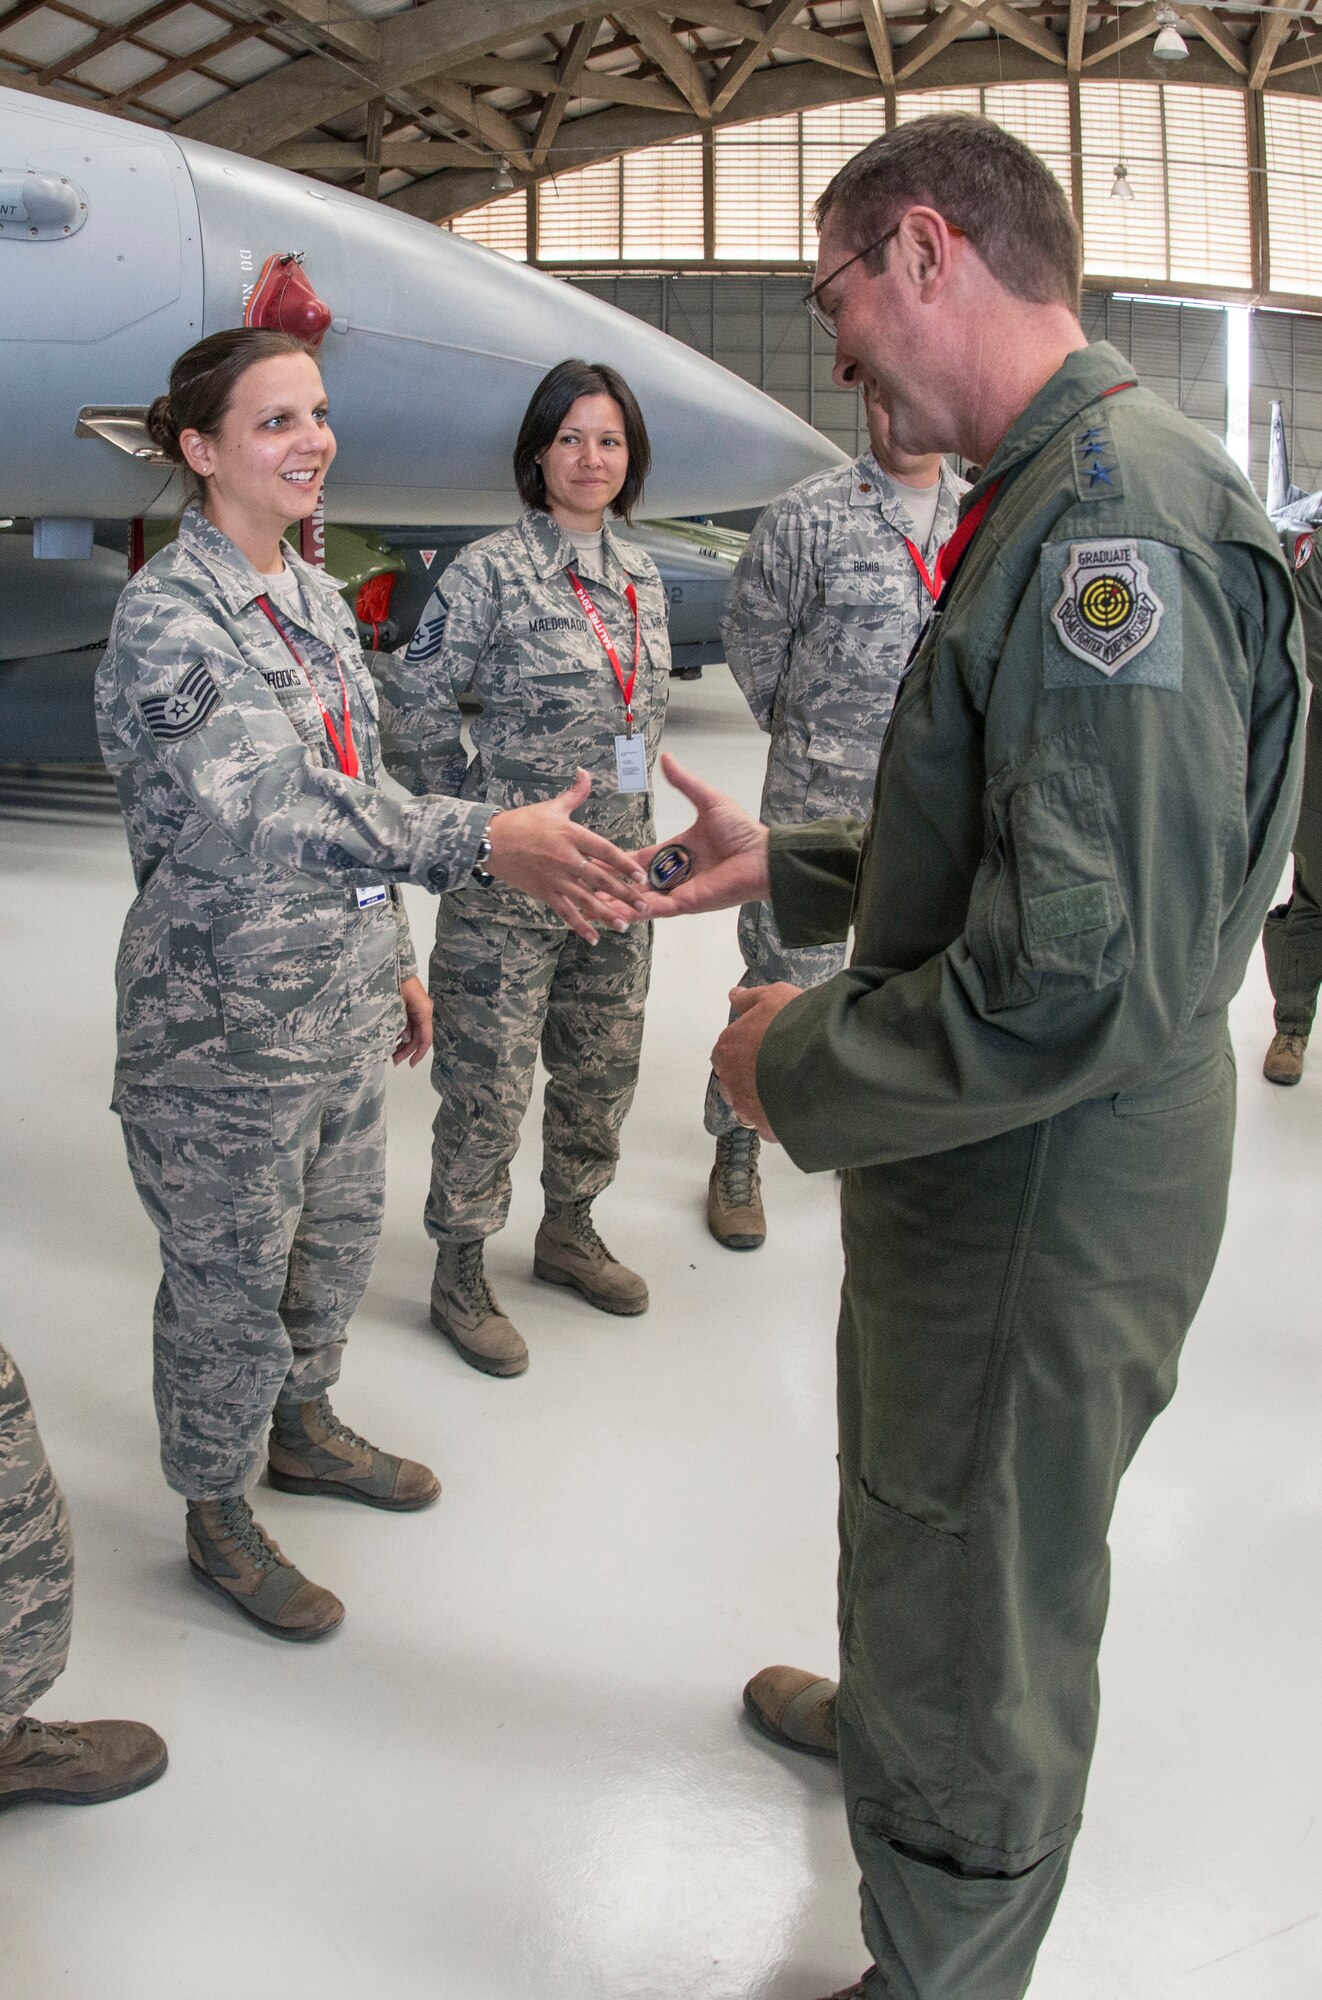 U.S. Air Force Lt. Gen. Joseph L. Lengyel, Vice Chief, National Guard Bureau coins U.S. Air Force Tech. Sgt. Lisa Brooks, 149th Fighter Wing, Texas Air National Guard, during Salitre 2014 at Cerro Moreno Air Force Base, near Antofagasta, Chile, Oct. 15. Salitre is a Chilean-led exercise where the U.S., Chile, Brazil, Argentina and Uruguay, focus on increasing interoperability between allied nations. (Air National Guard photo by Senior Master Sgt. Elizabeth Gilbert/released)